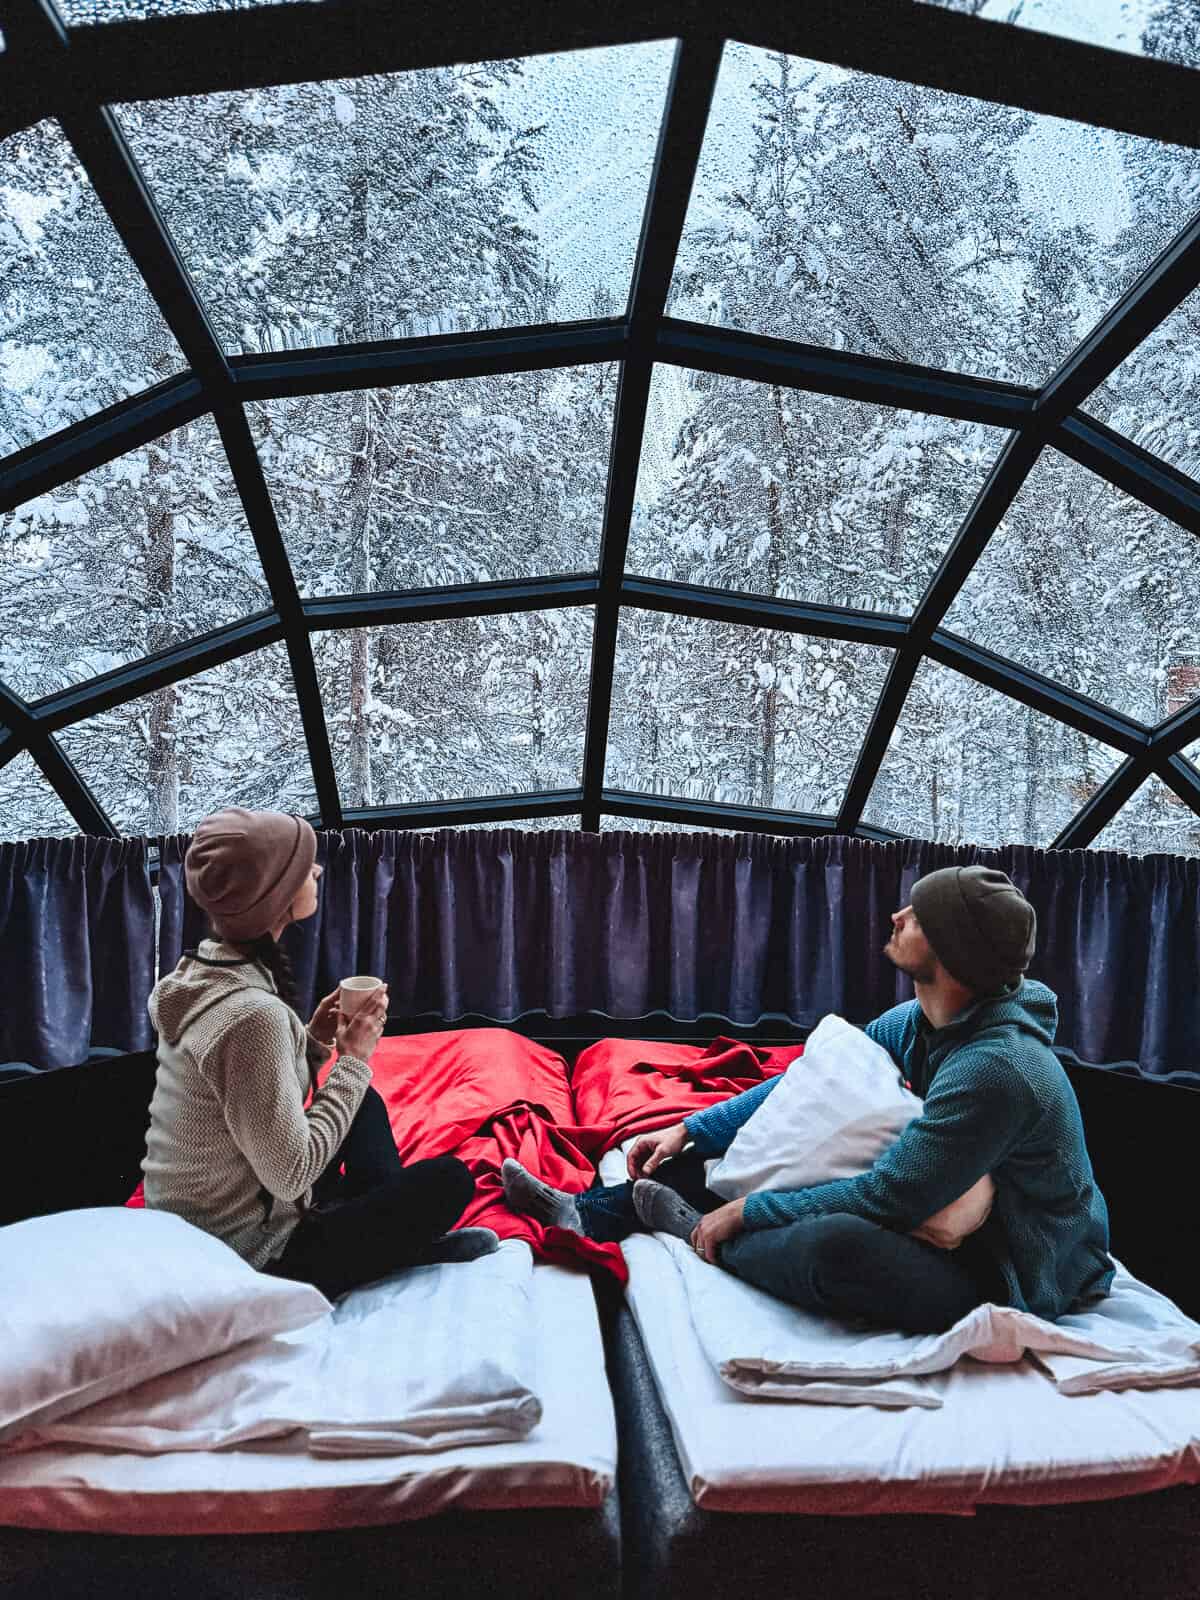 Two people relax inside a cozy igloo with a transparent dome, sipping warm drinks and looking out at a snowy forest landscape